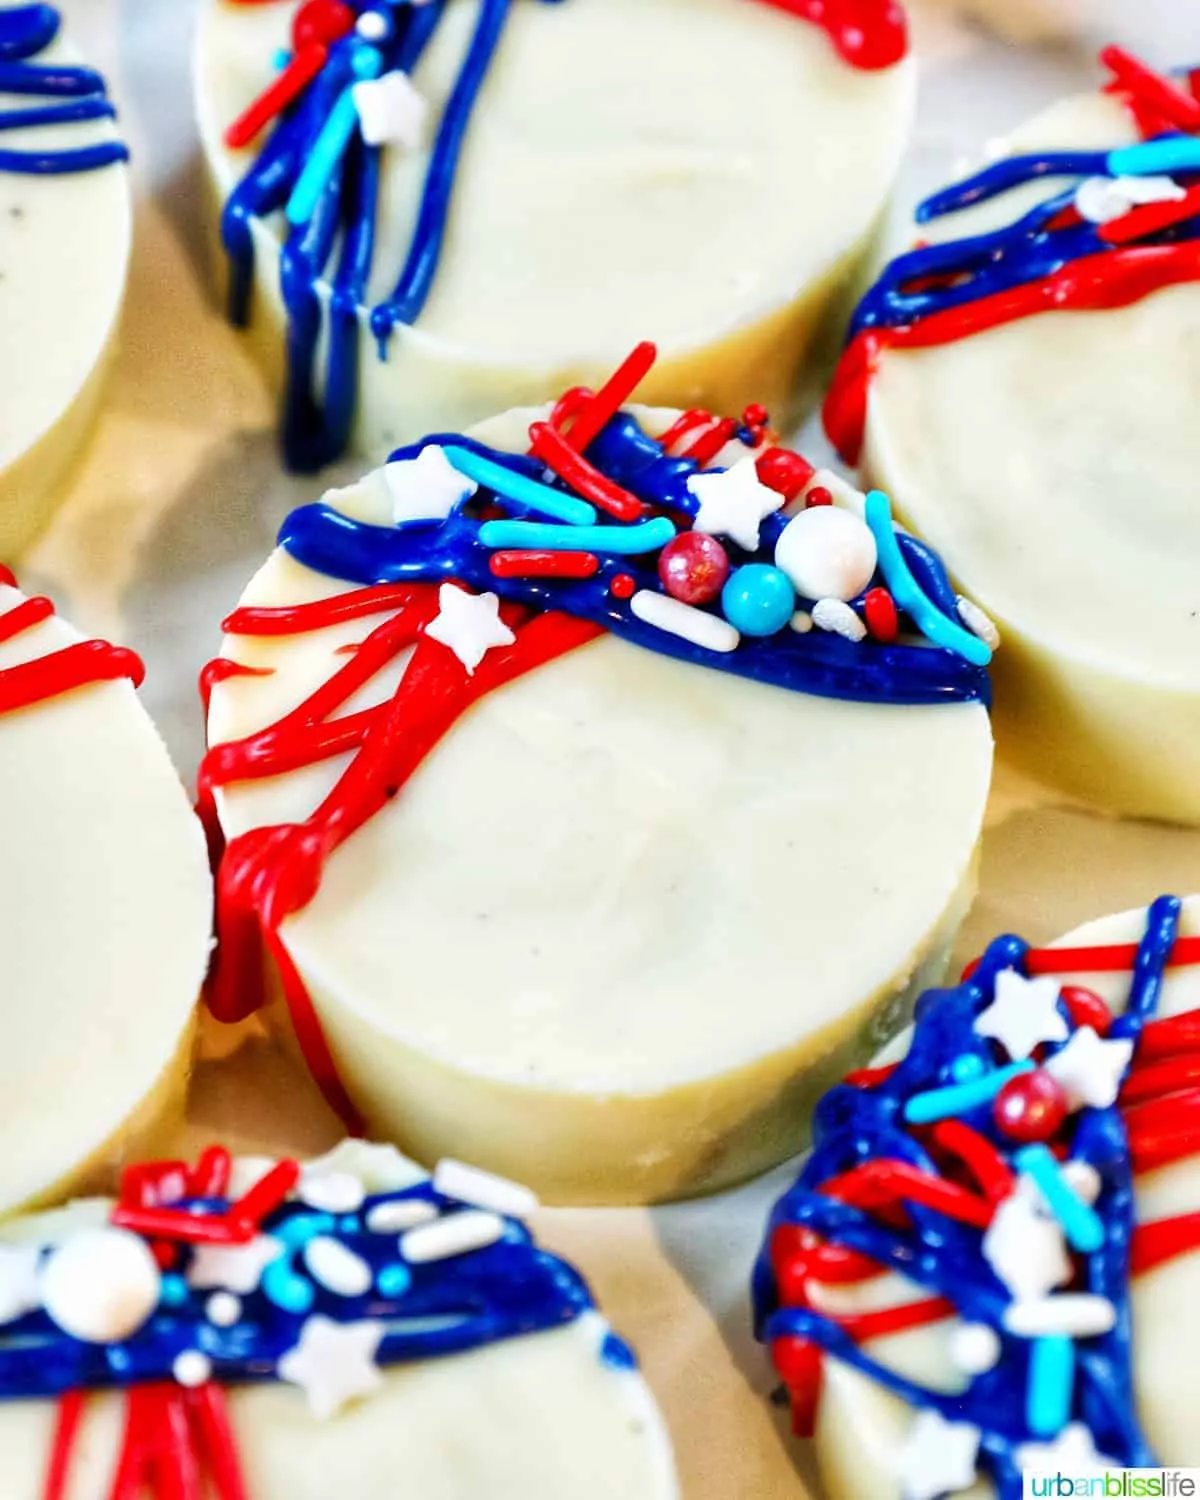 Oreo cookies dipped in white chocolate decorated with patriotic colors.